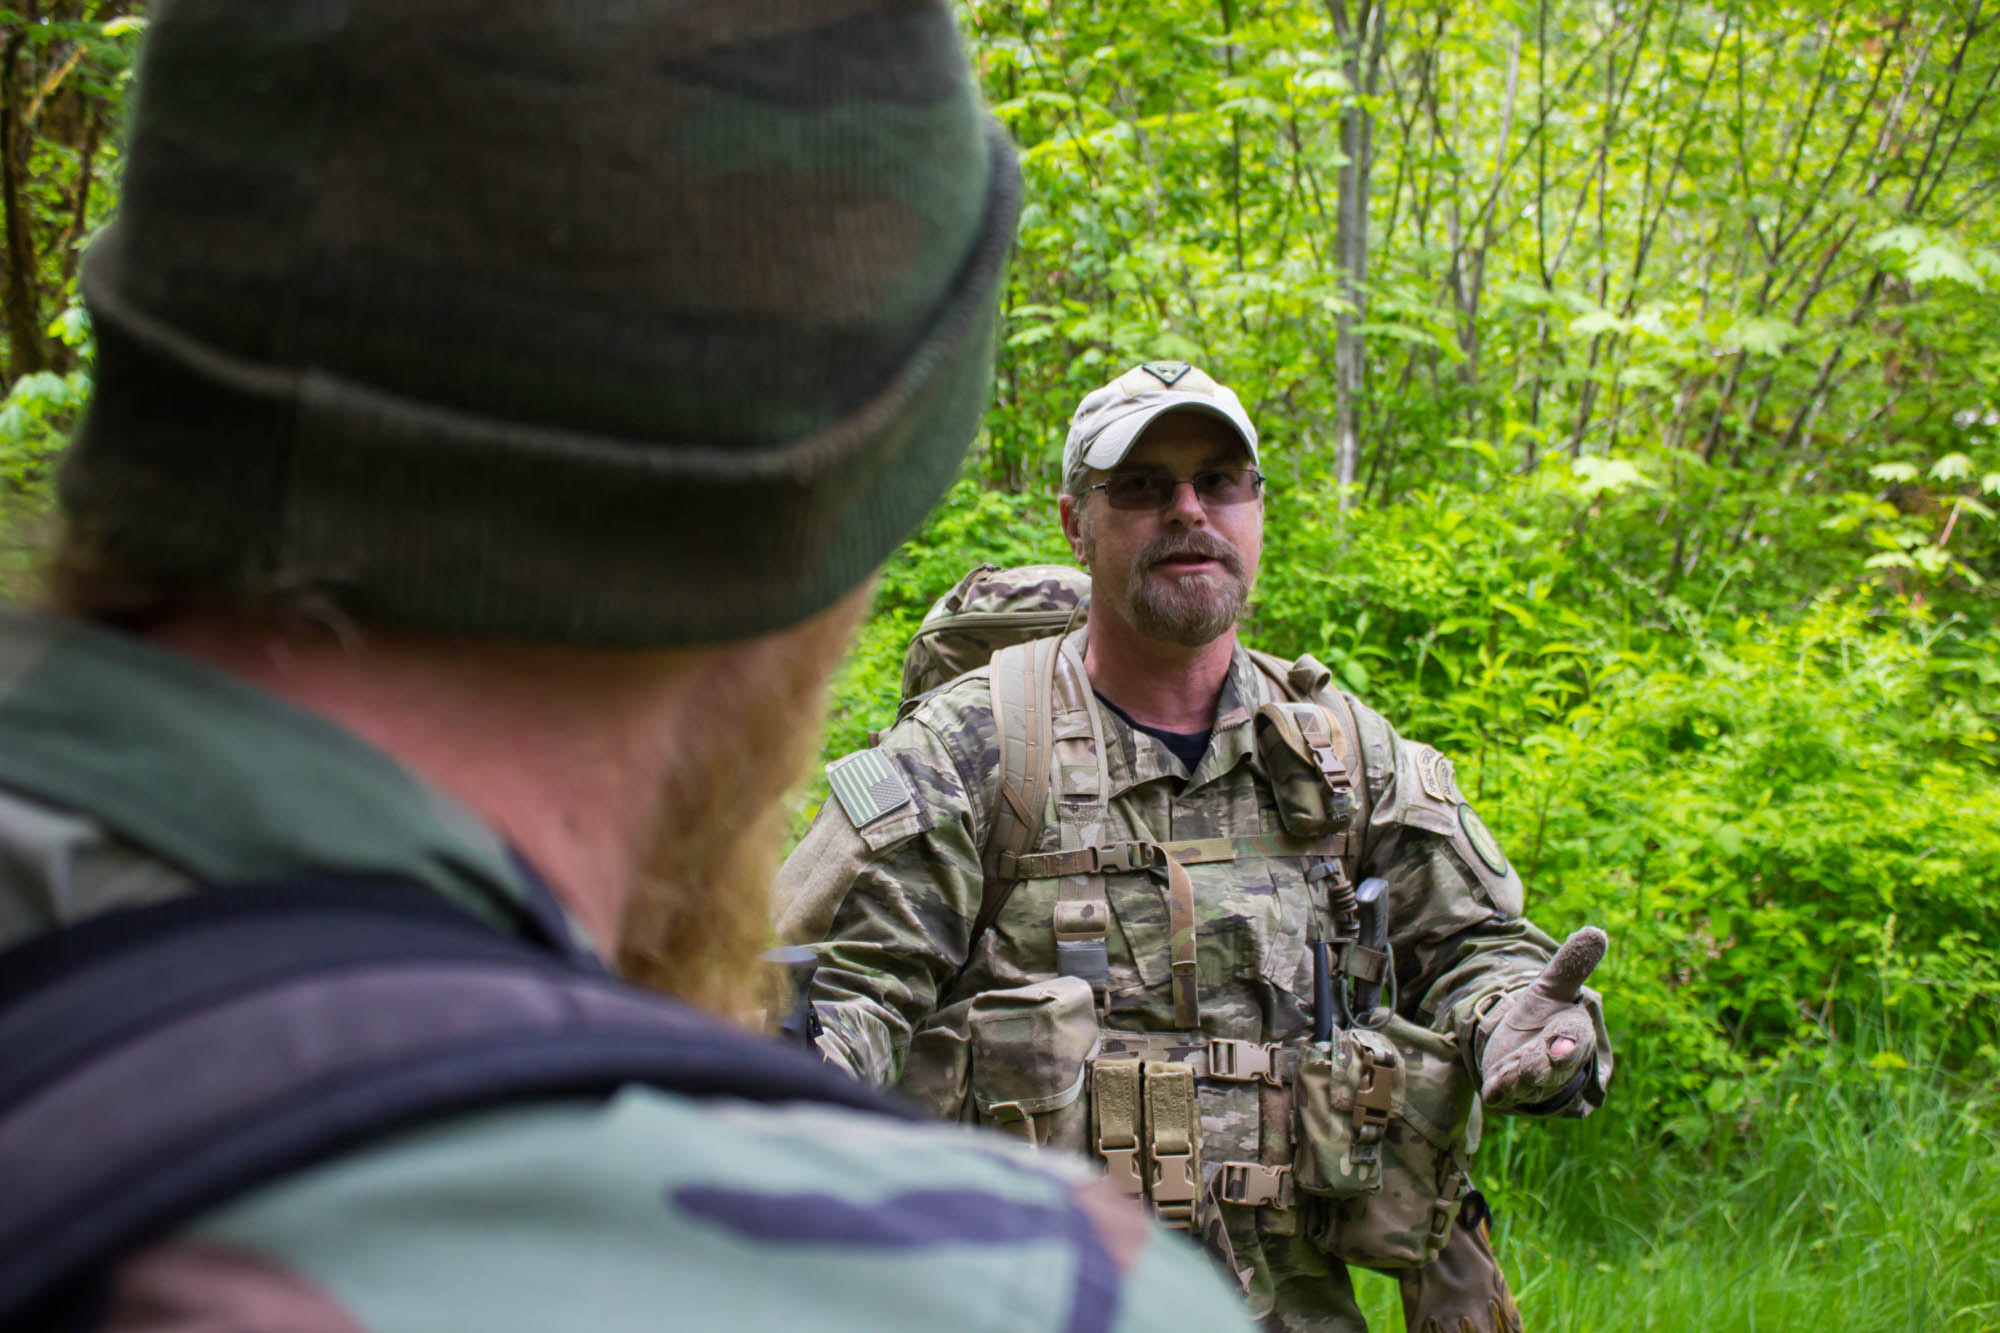 Tactical Tracking Course Instructed by John Hurth of TYR Group LLC